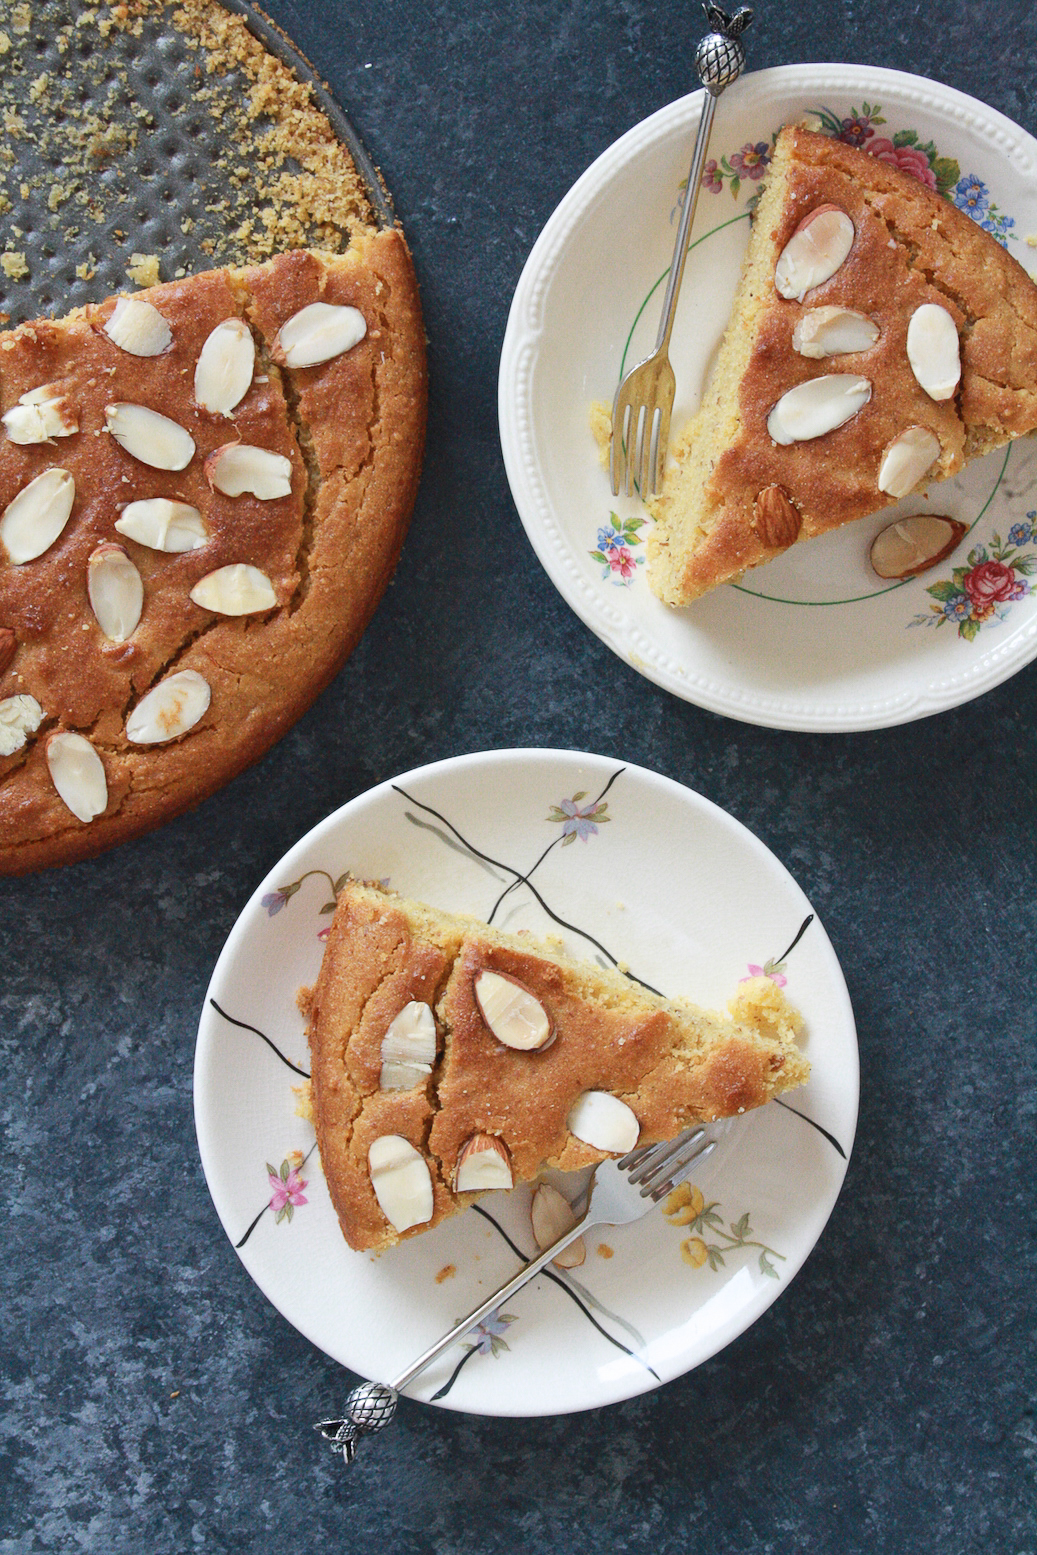 A gluten-free, super flavourful cake made with ground almonds and cornmeal!